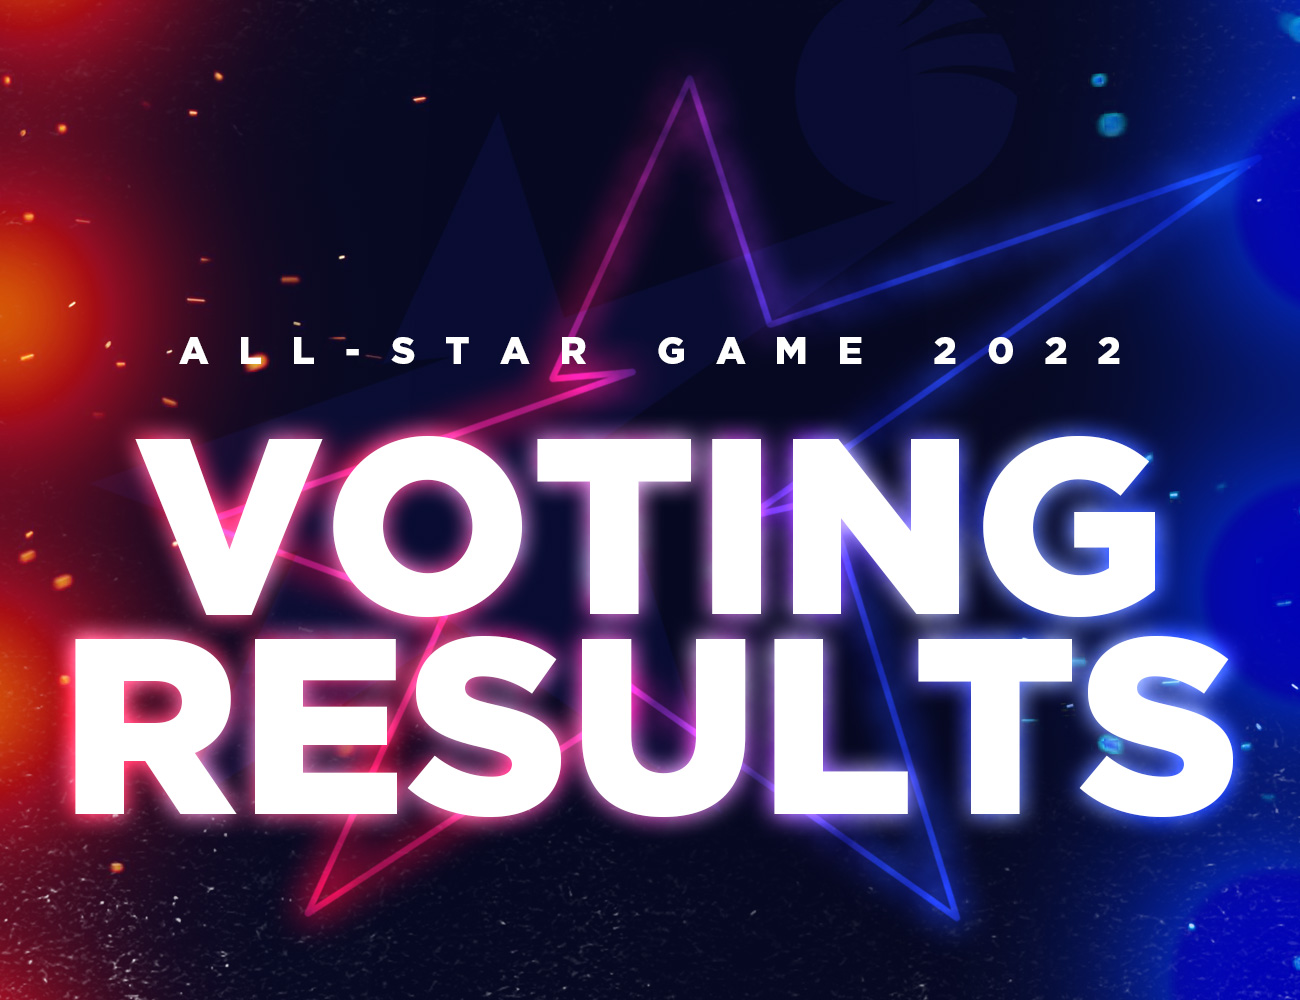 Artem Zabelin and Errick McCollum are the most popular players in the fans’ voting for the All-Star Game. The extended list of players is revealed